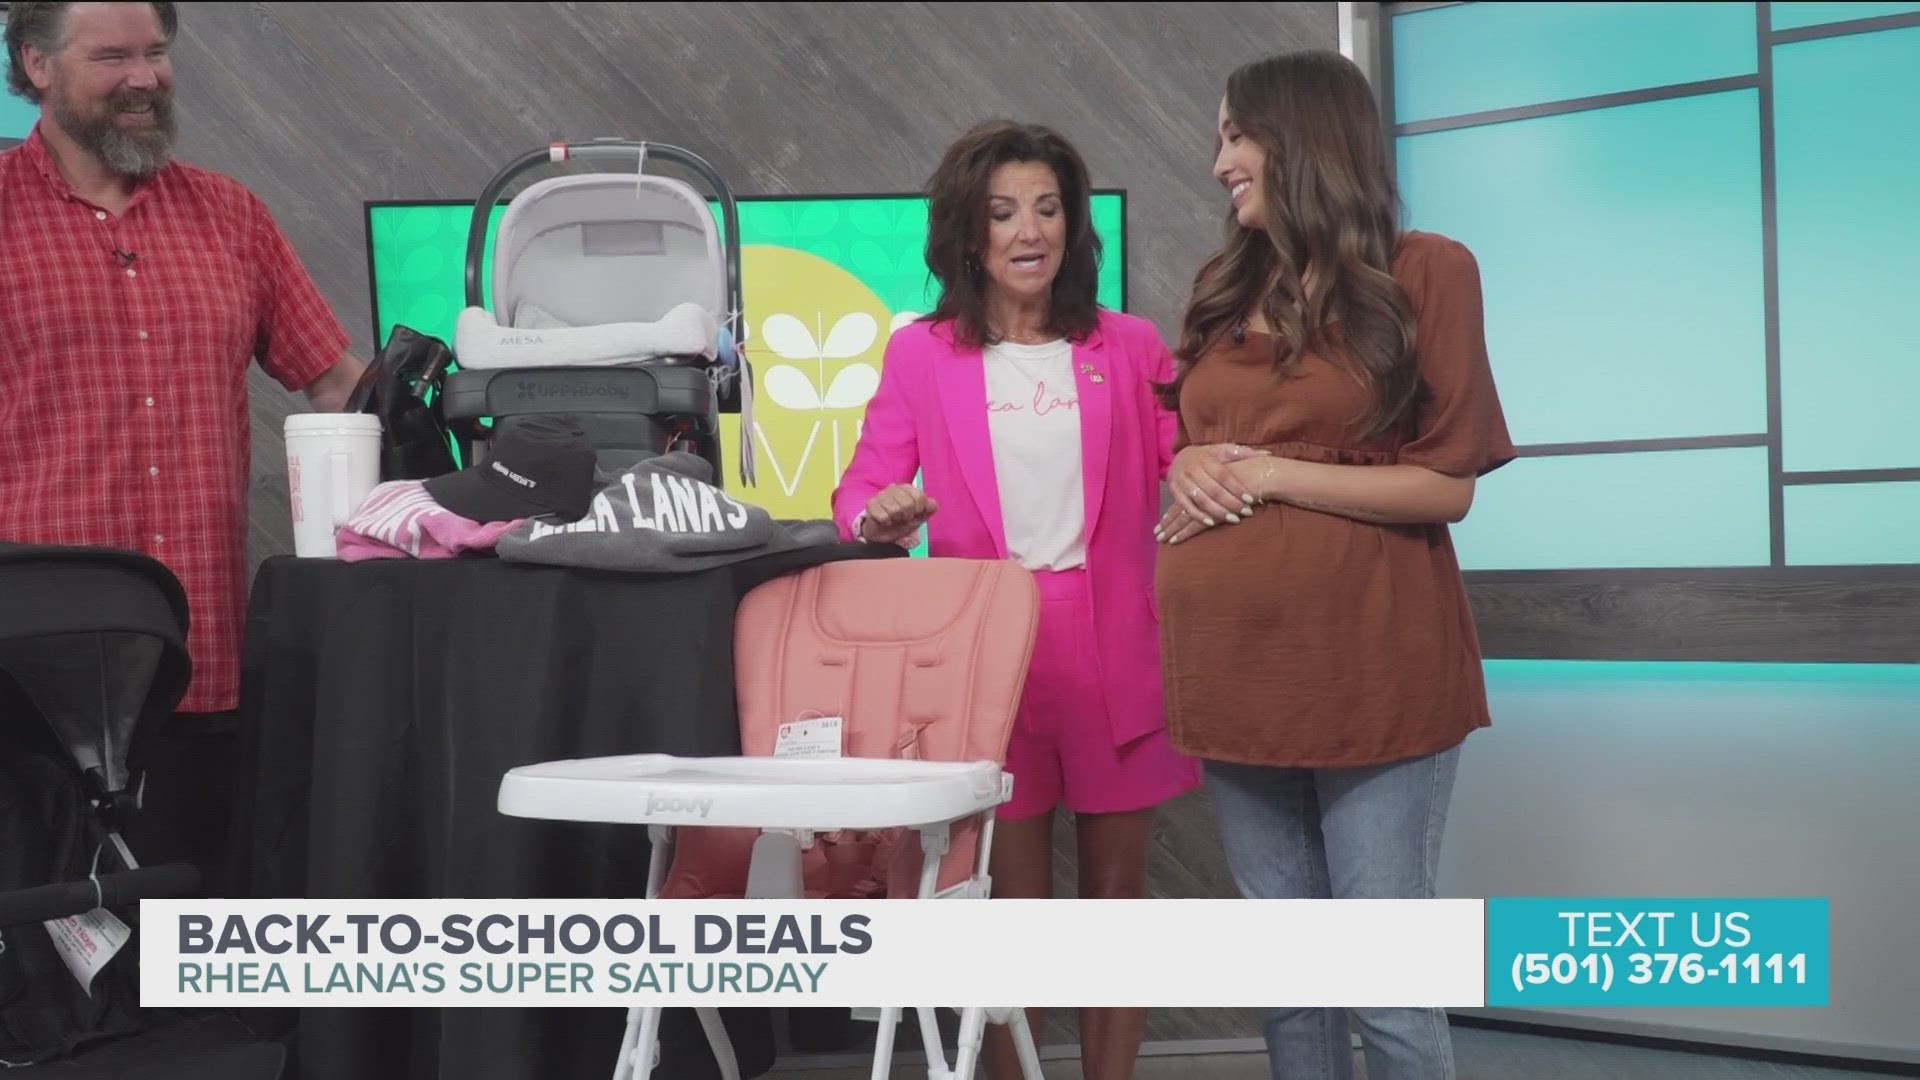 The school year is almost here, and Rhea Lana's has a big back-to-school sale coming up.